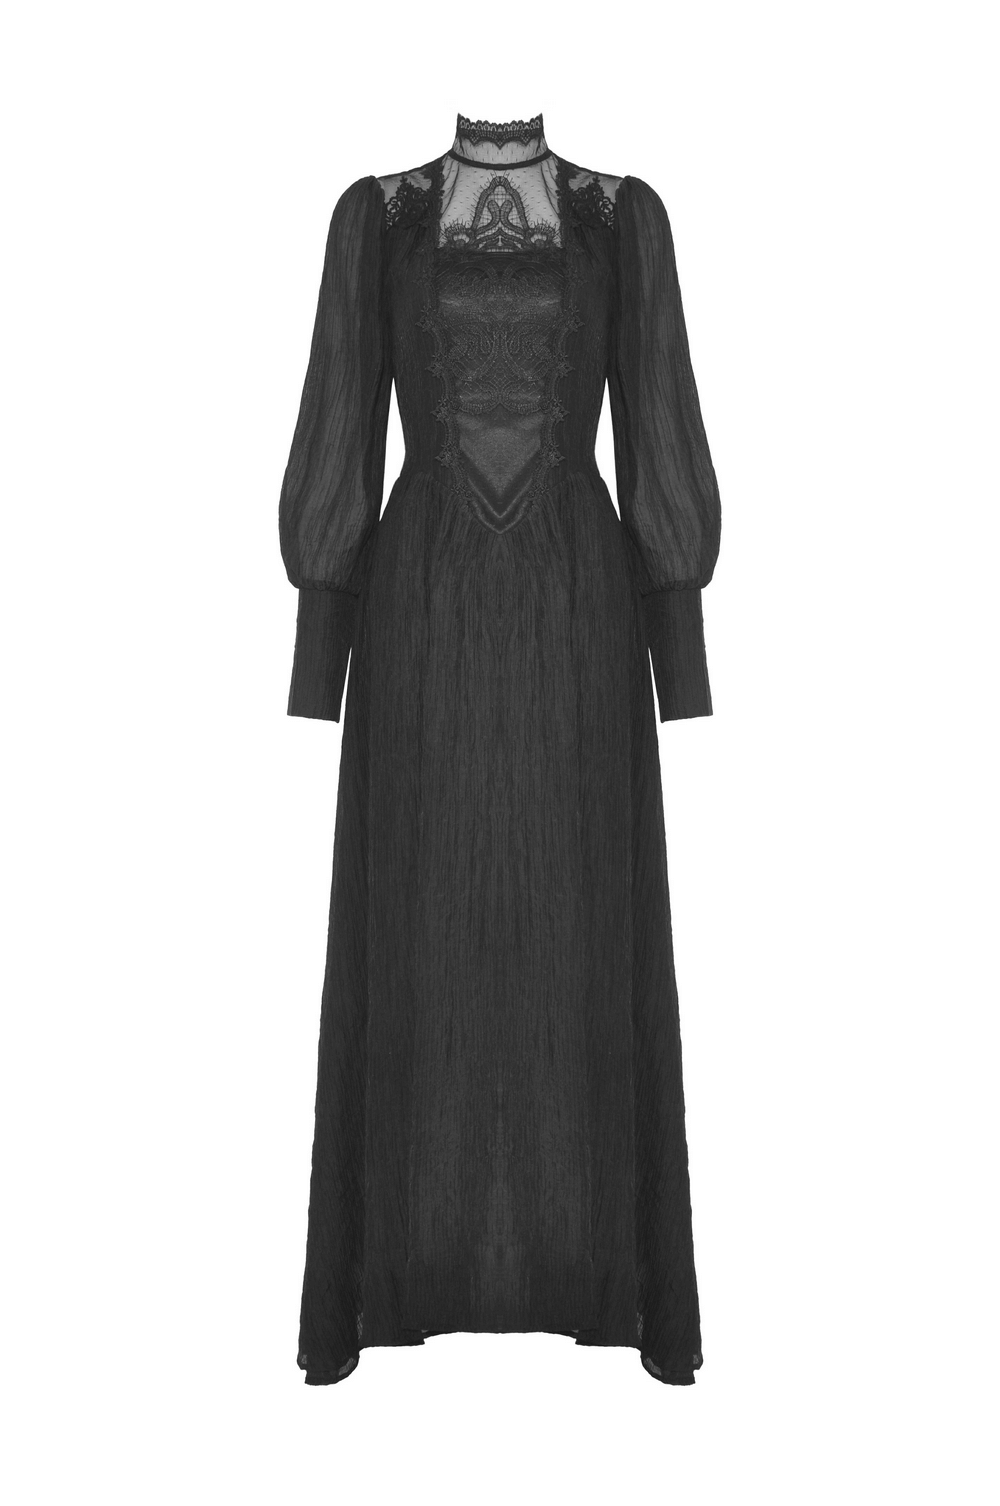 Elegant Black Lace Evening Gown with Long Sleeves